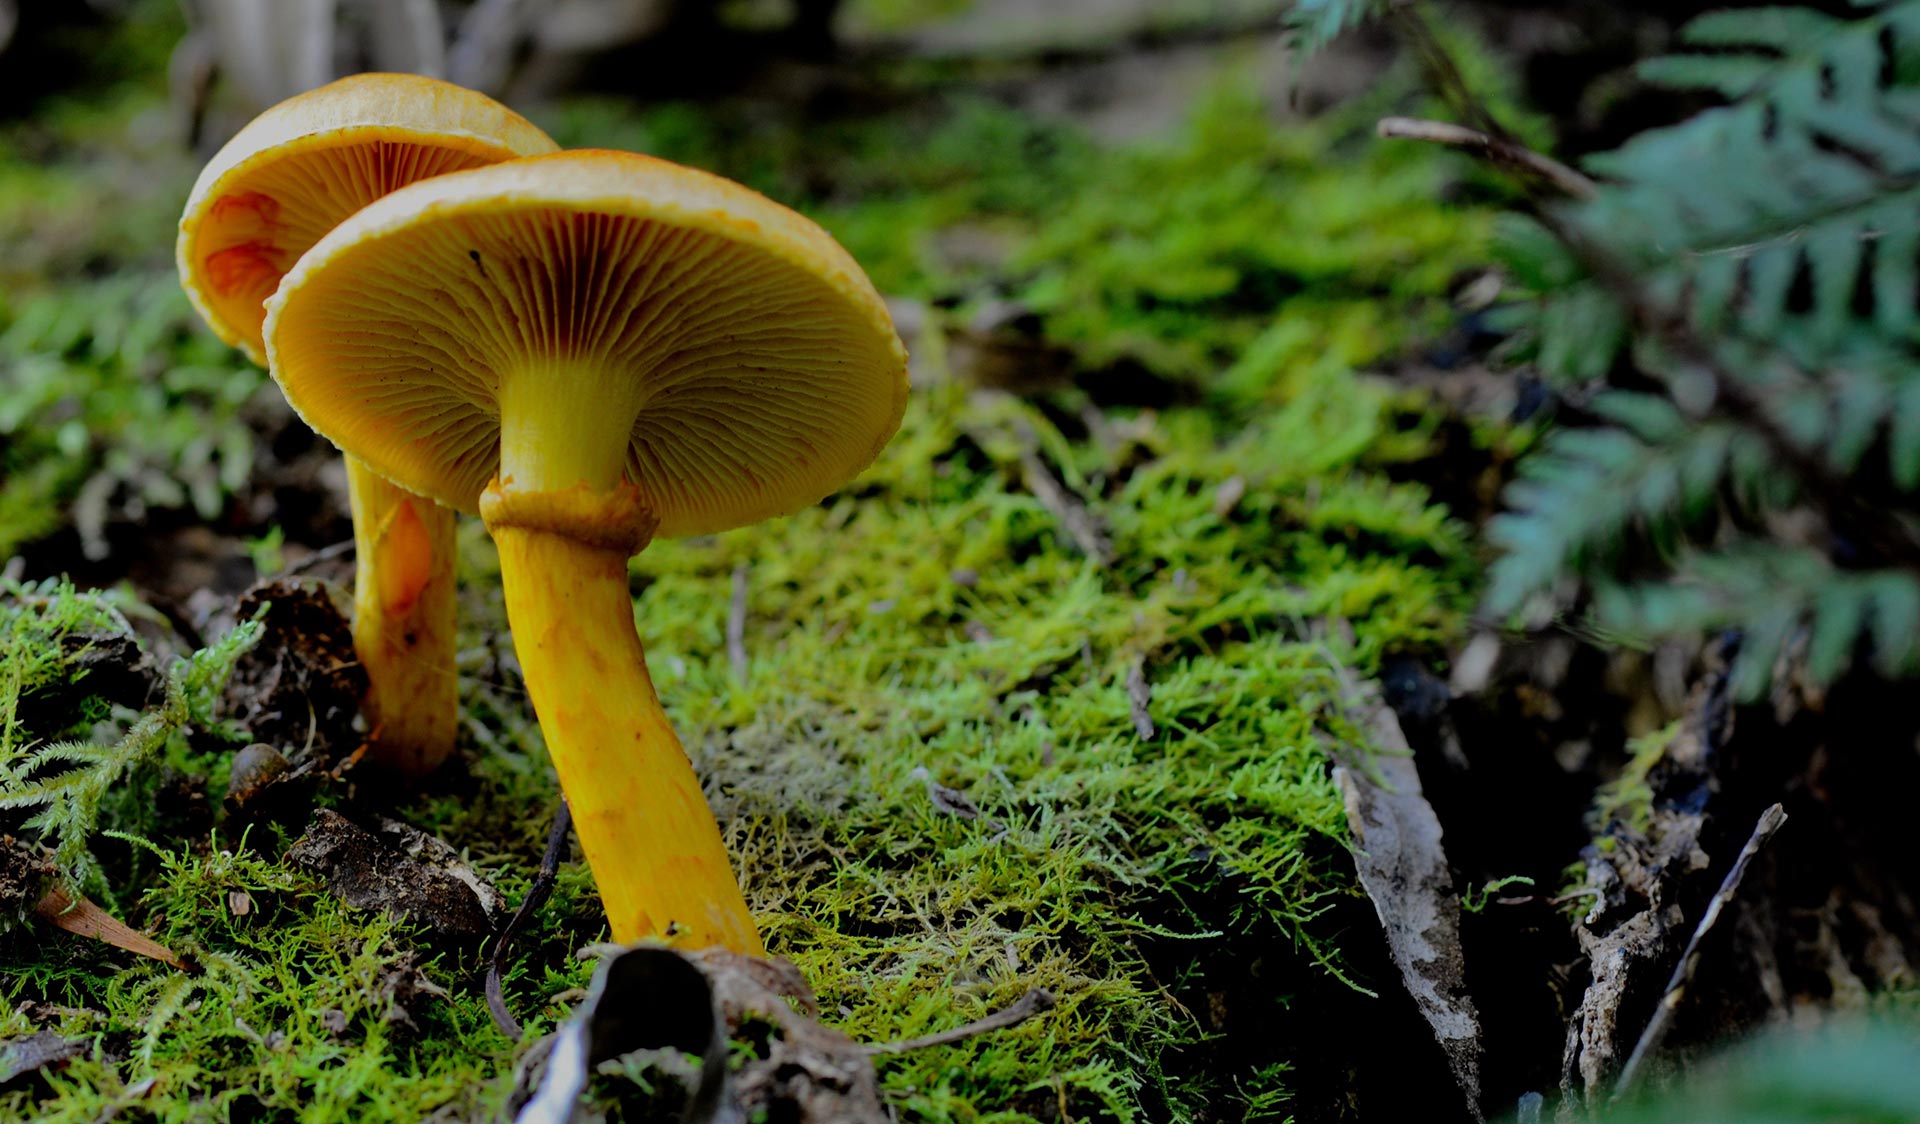 Two mushrooms grow in the undergrowth in the Great Otway National Park.